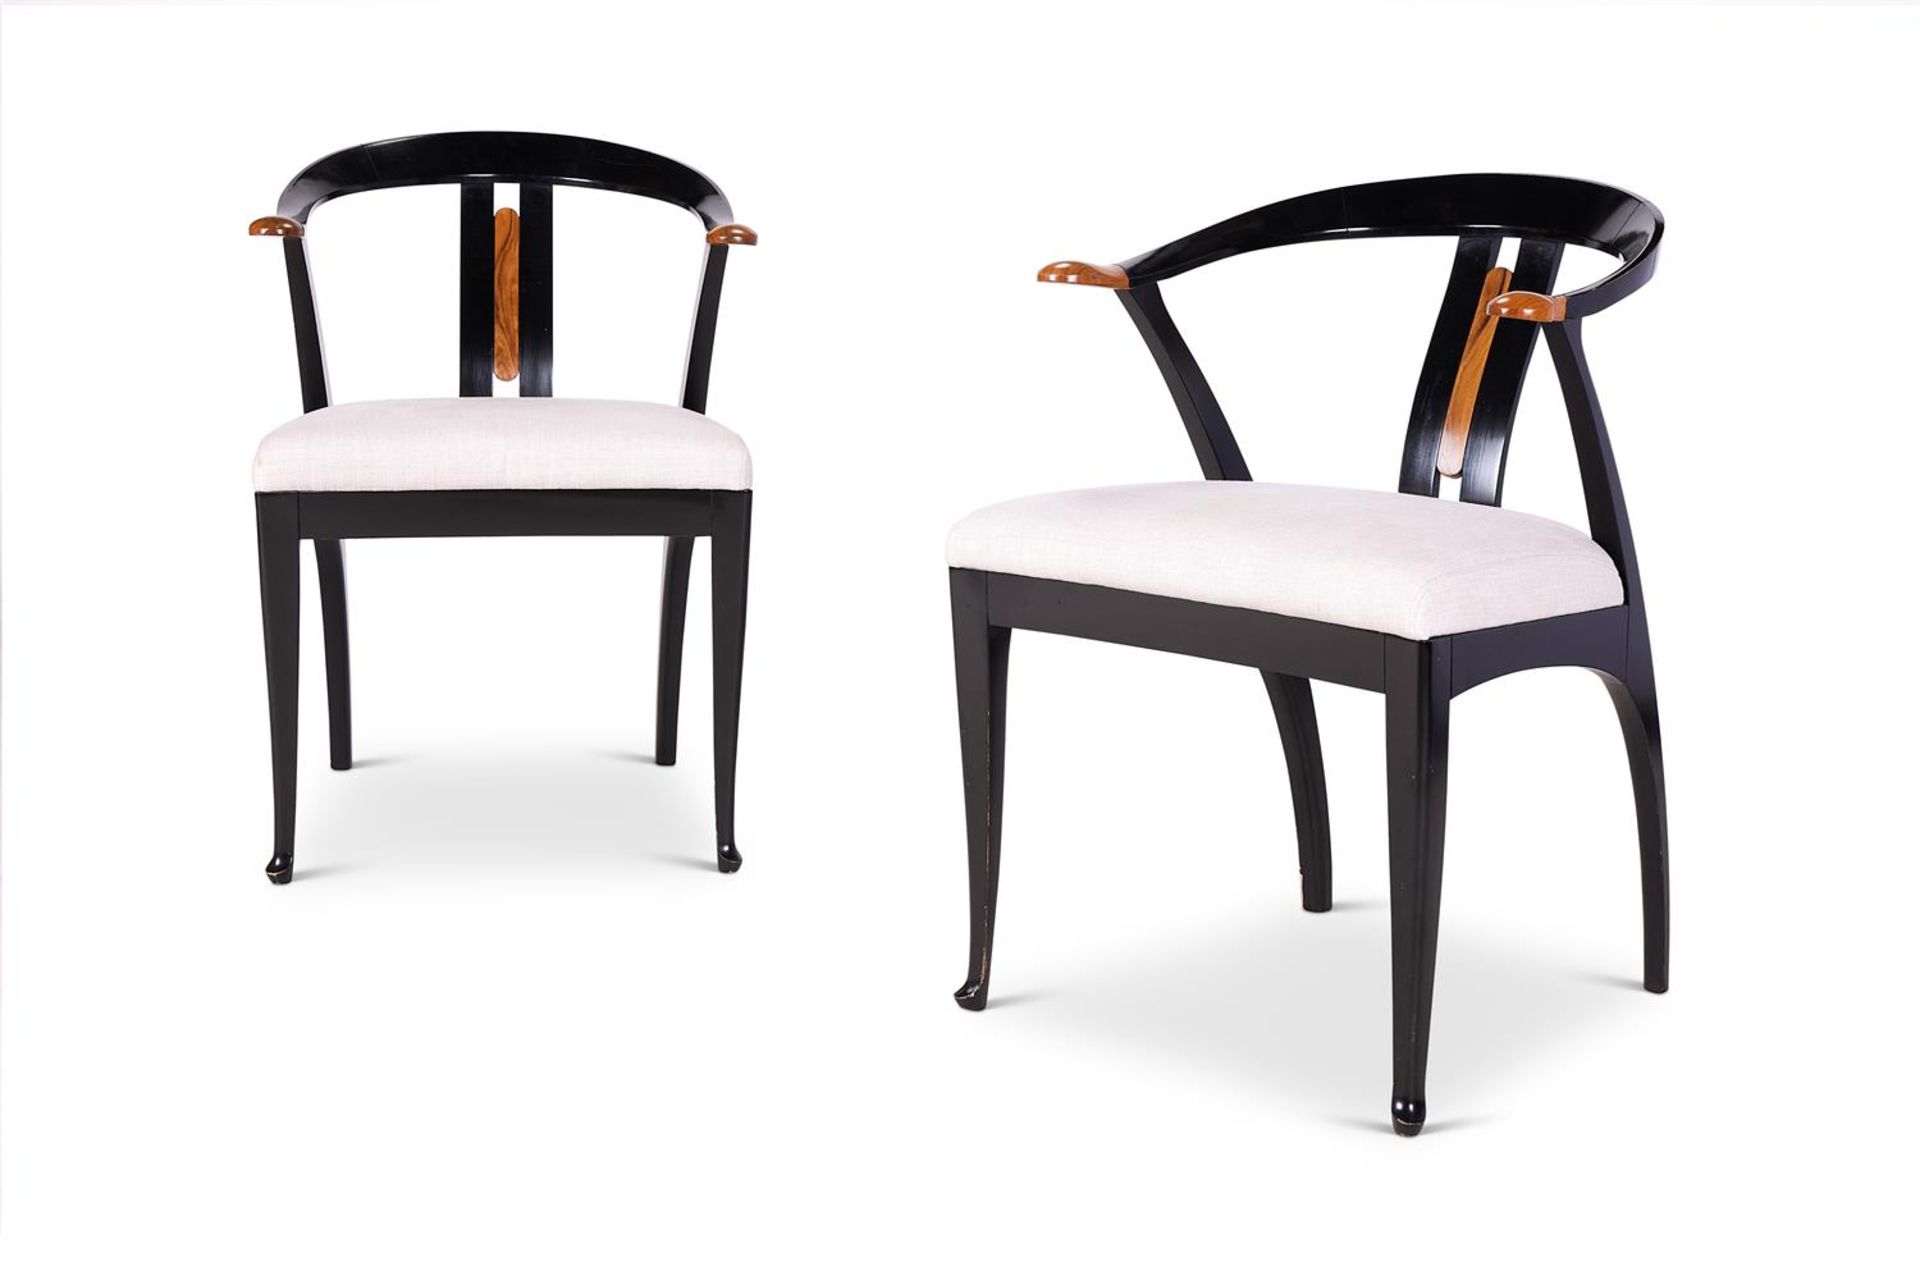 A PAIR OF EBONISED AND WALNUT ARMCHAIRS, BY GIORGETTI, ITALIAN, LATE 20TH CENTURY